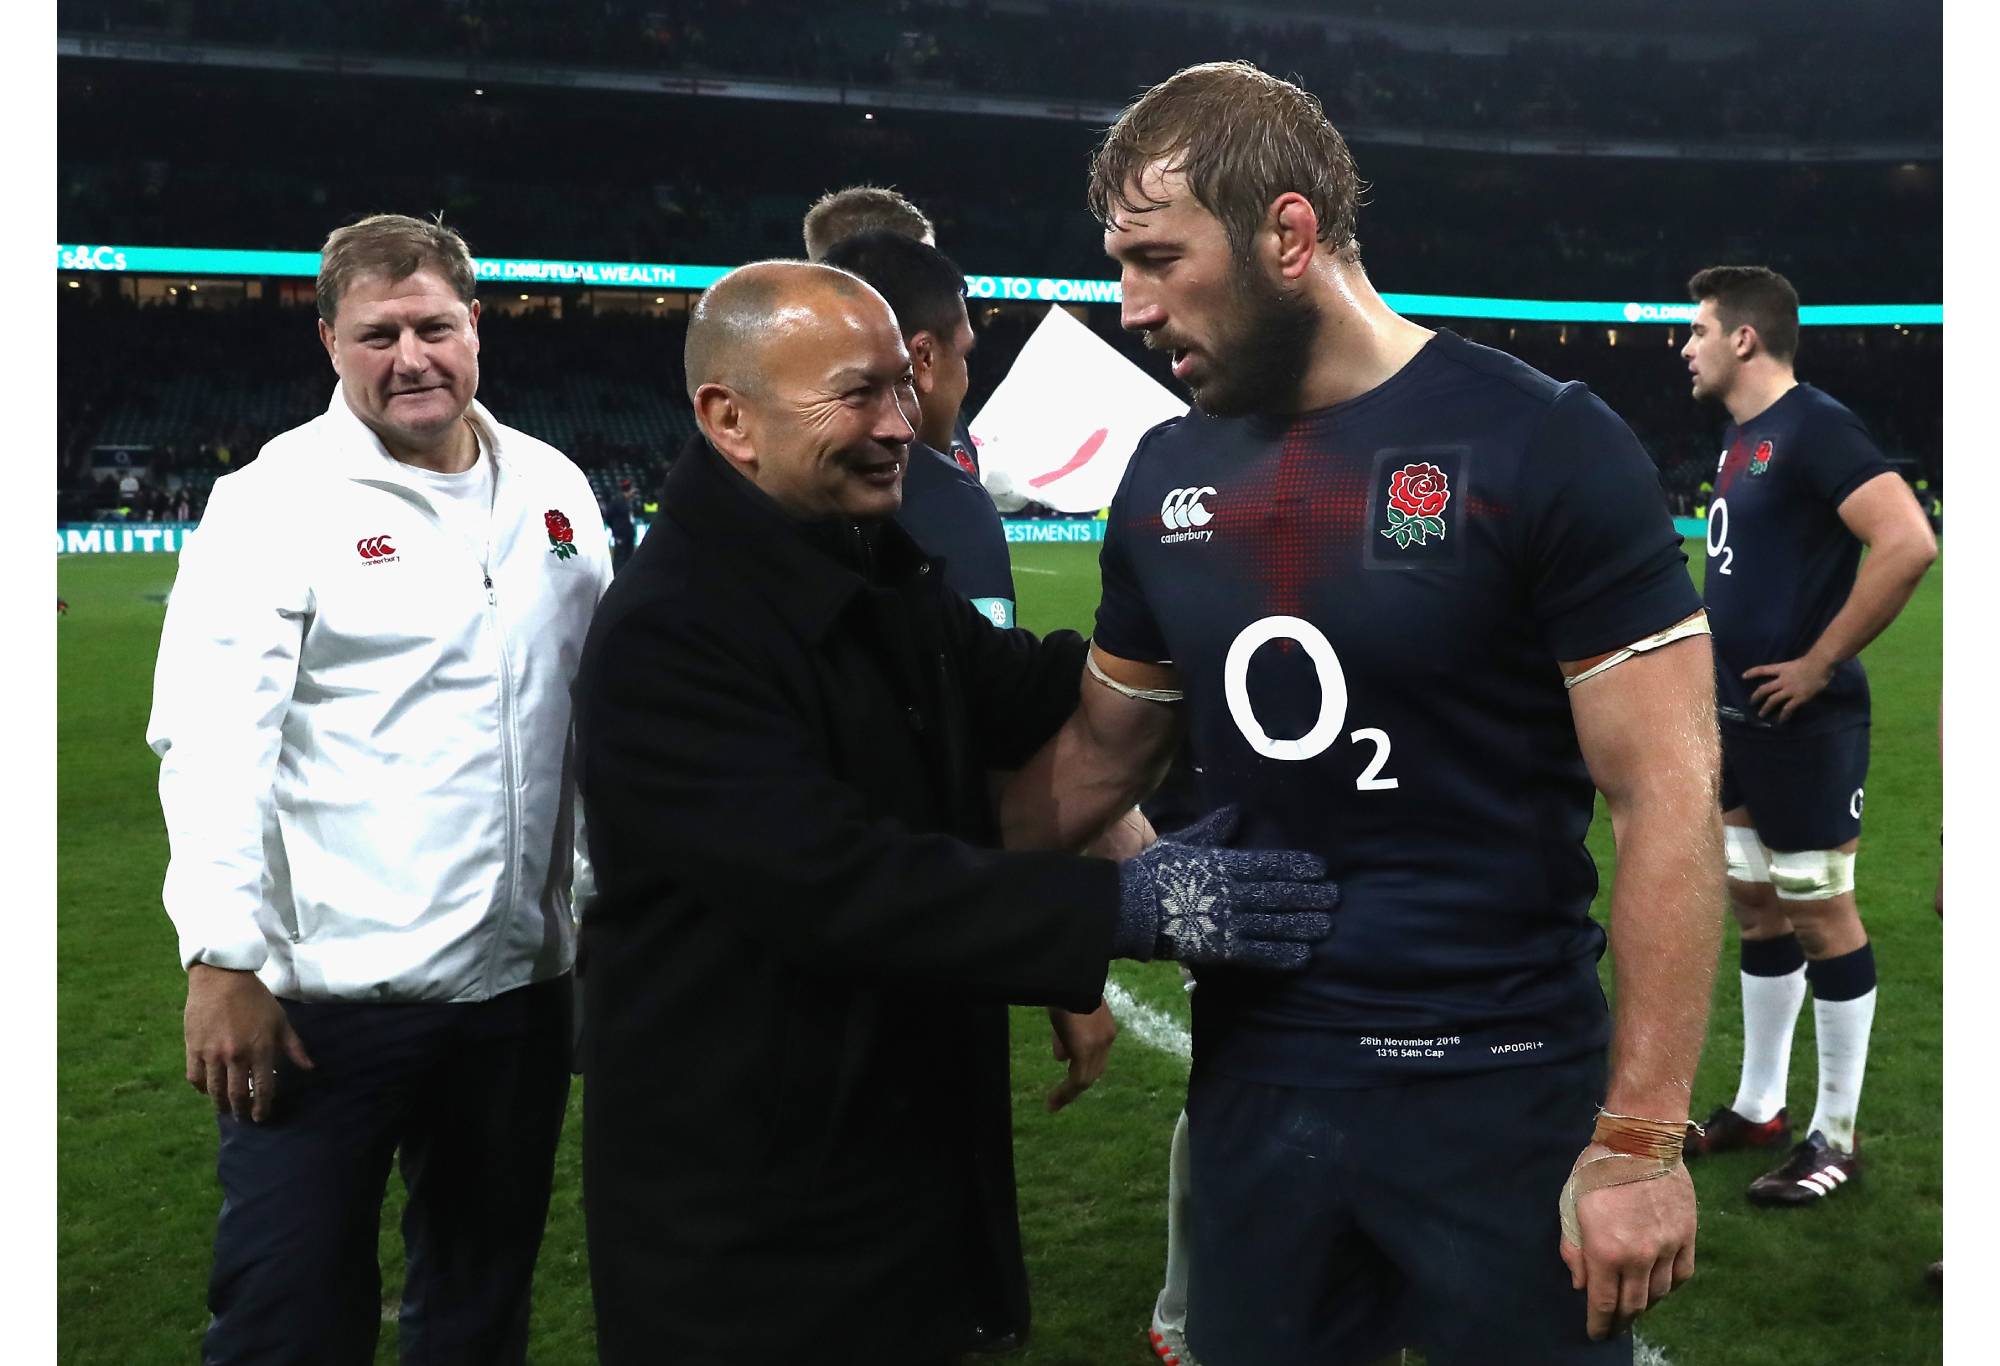 LONDON, ENGLAND - NOVEMBER 26: Eddie Jones the head coach of England shakes hands with Chris Robshaw of England following the Old Mutual Wealth Series match between England and Argentina at Twickenham Stadium on November 26, 2016 in London, England. (Photo by David Rogers - RFU/The RFU Collection via Getty Imagesges)